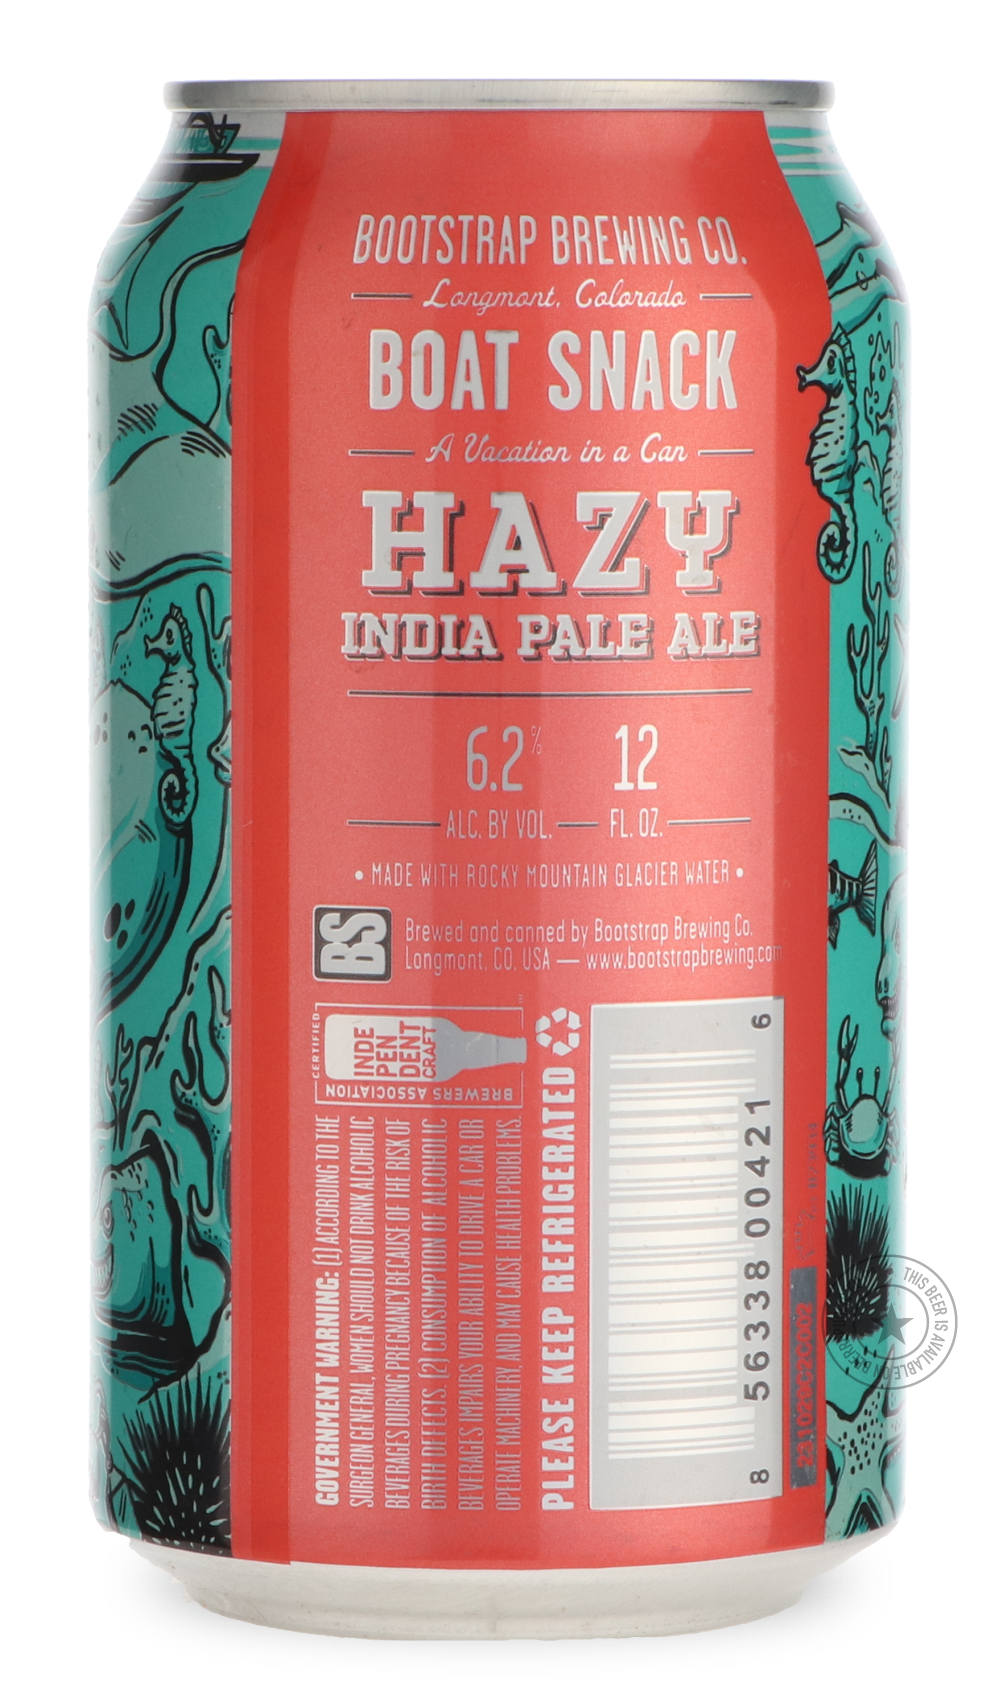 -Bootstrap- Boat Snack-IPA- Only @ Beer Republic - The best online beer store for American & Canadian craft beer - Buy beer online from the USA and Canada - Bier online kopen - Amerikaans bier kopen - Craft beer store - Craft beer kopen - Amerikanisch bier kaufen - Bier online kaufen - Acheter biere online - IPA - Stout - Porter - New England IPA - Hazy IPA - Imperial Stout - Barrel Aged - Barrel Aged Imperial Stout - Brown - Dark beer - Blond - Blonde - Pilsner - Lager - Wheat - Weizen - Amber - Barley Win